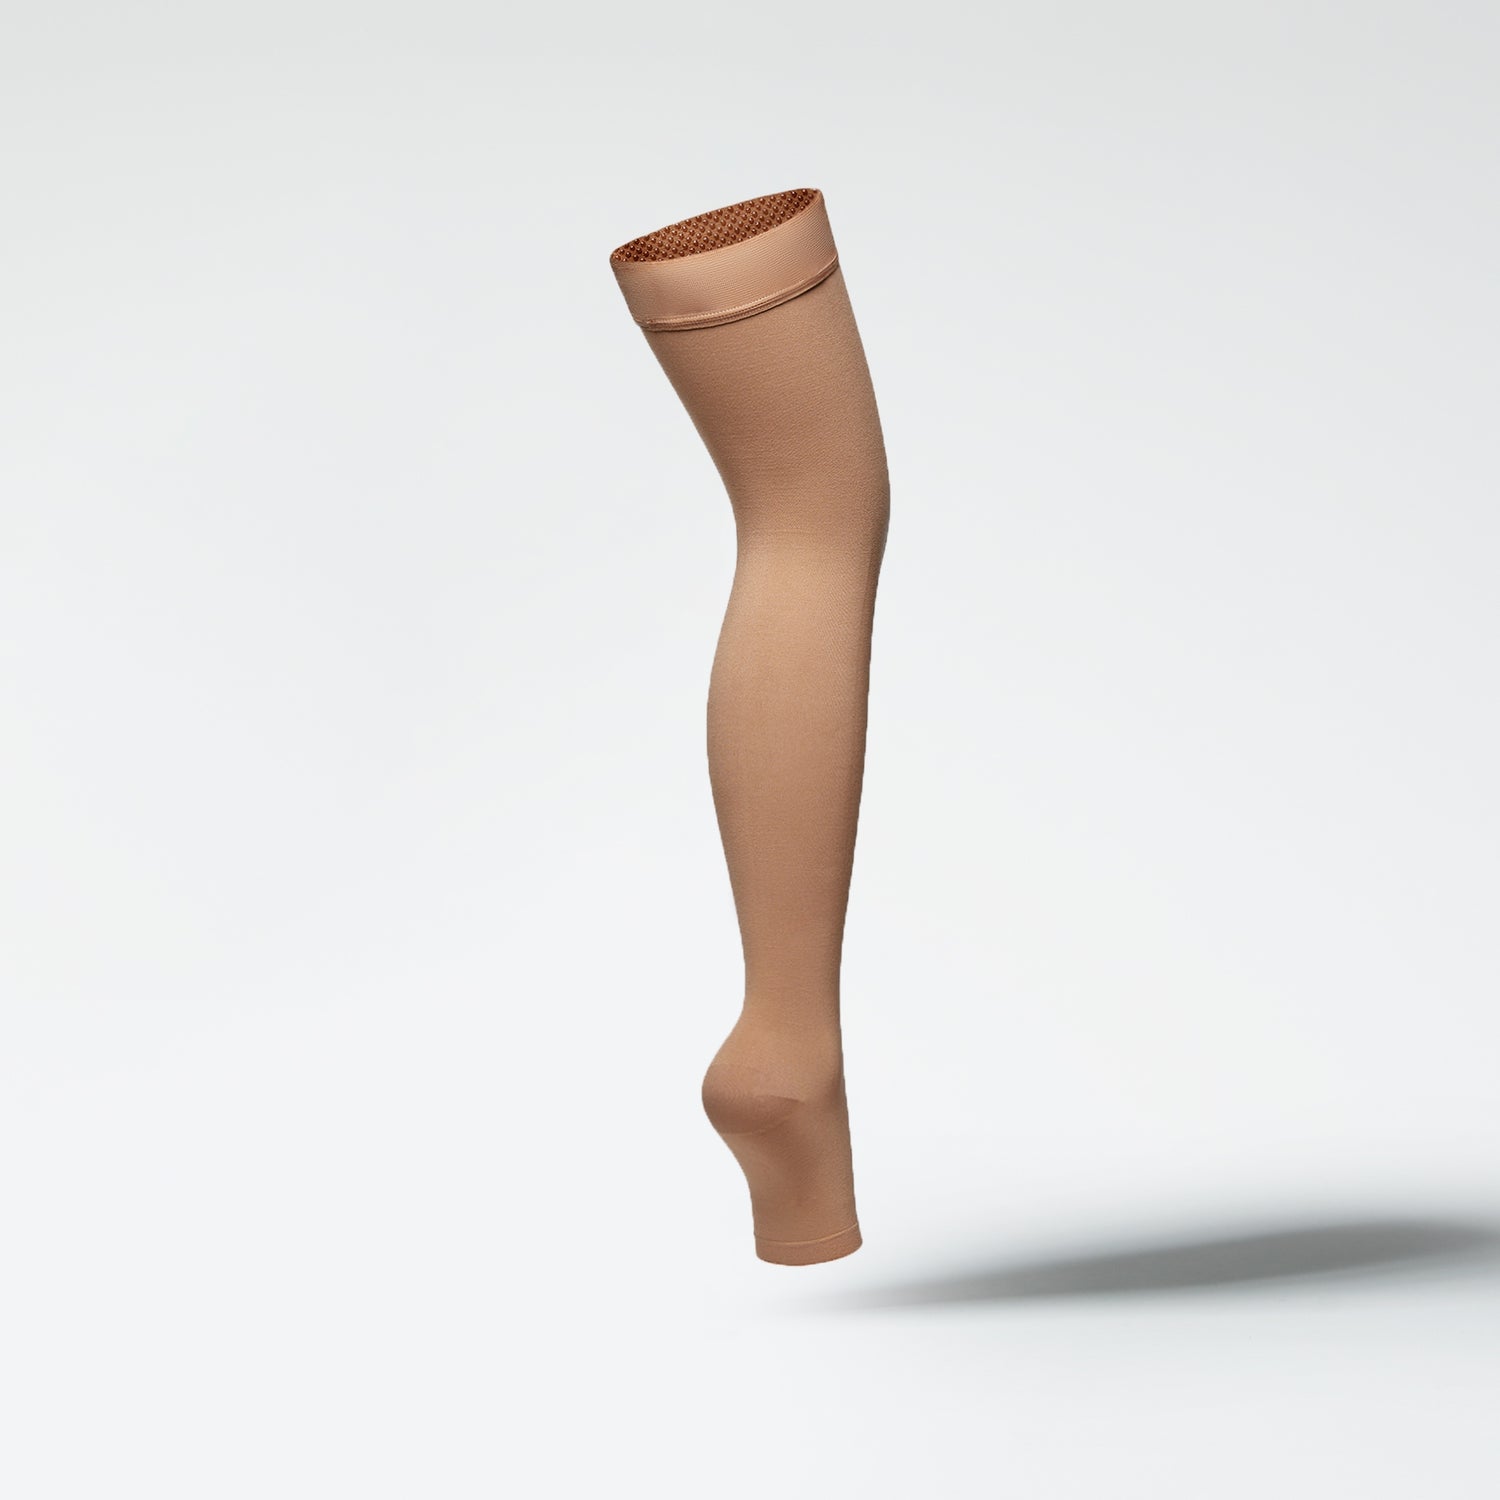 Side view of a medical thigh high stocking in sand.